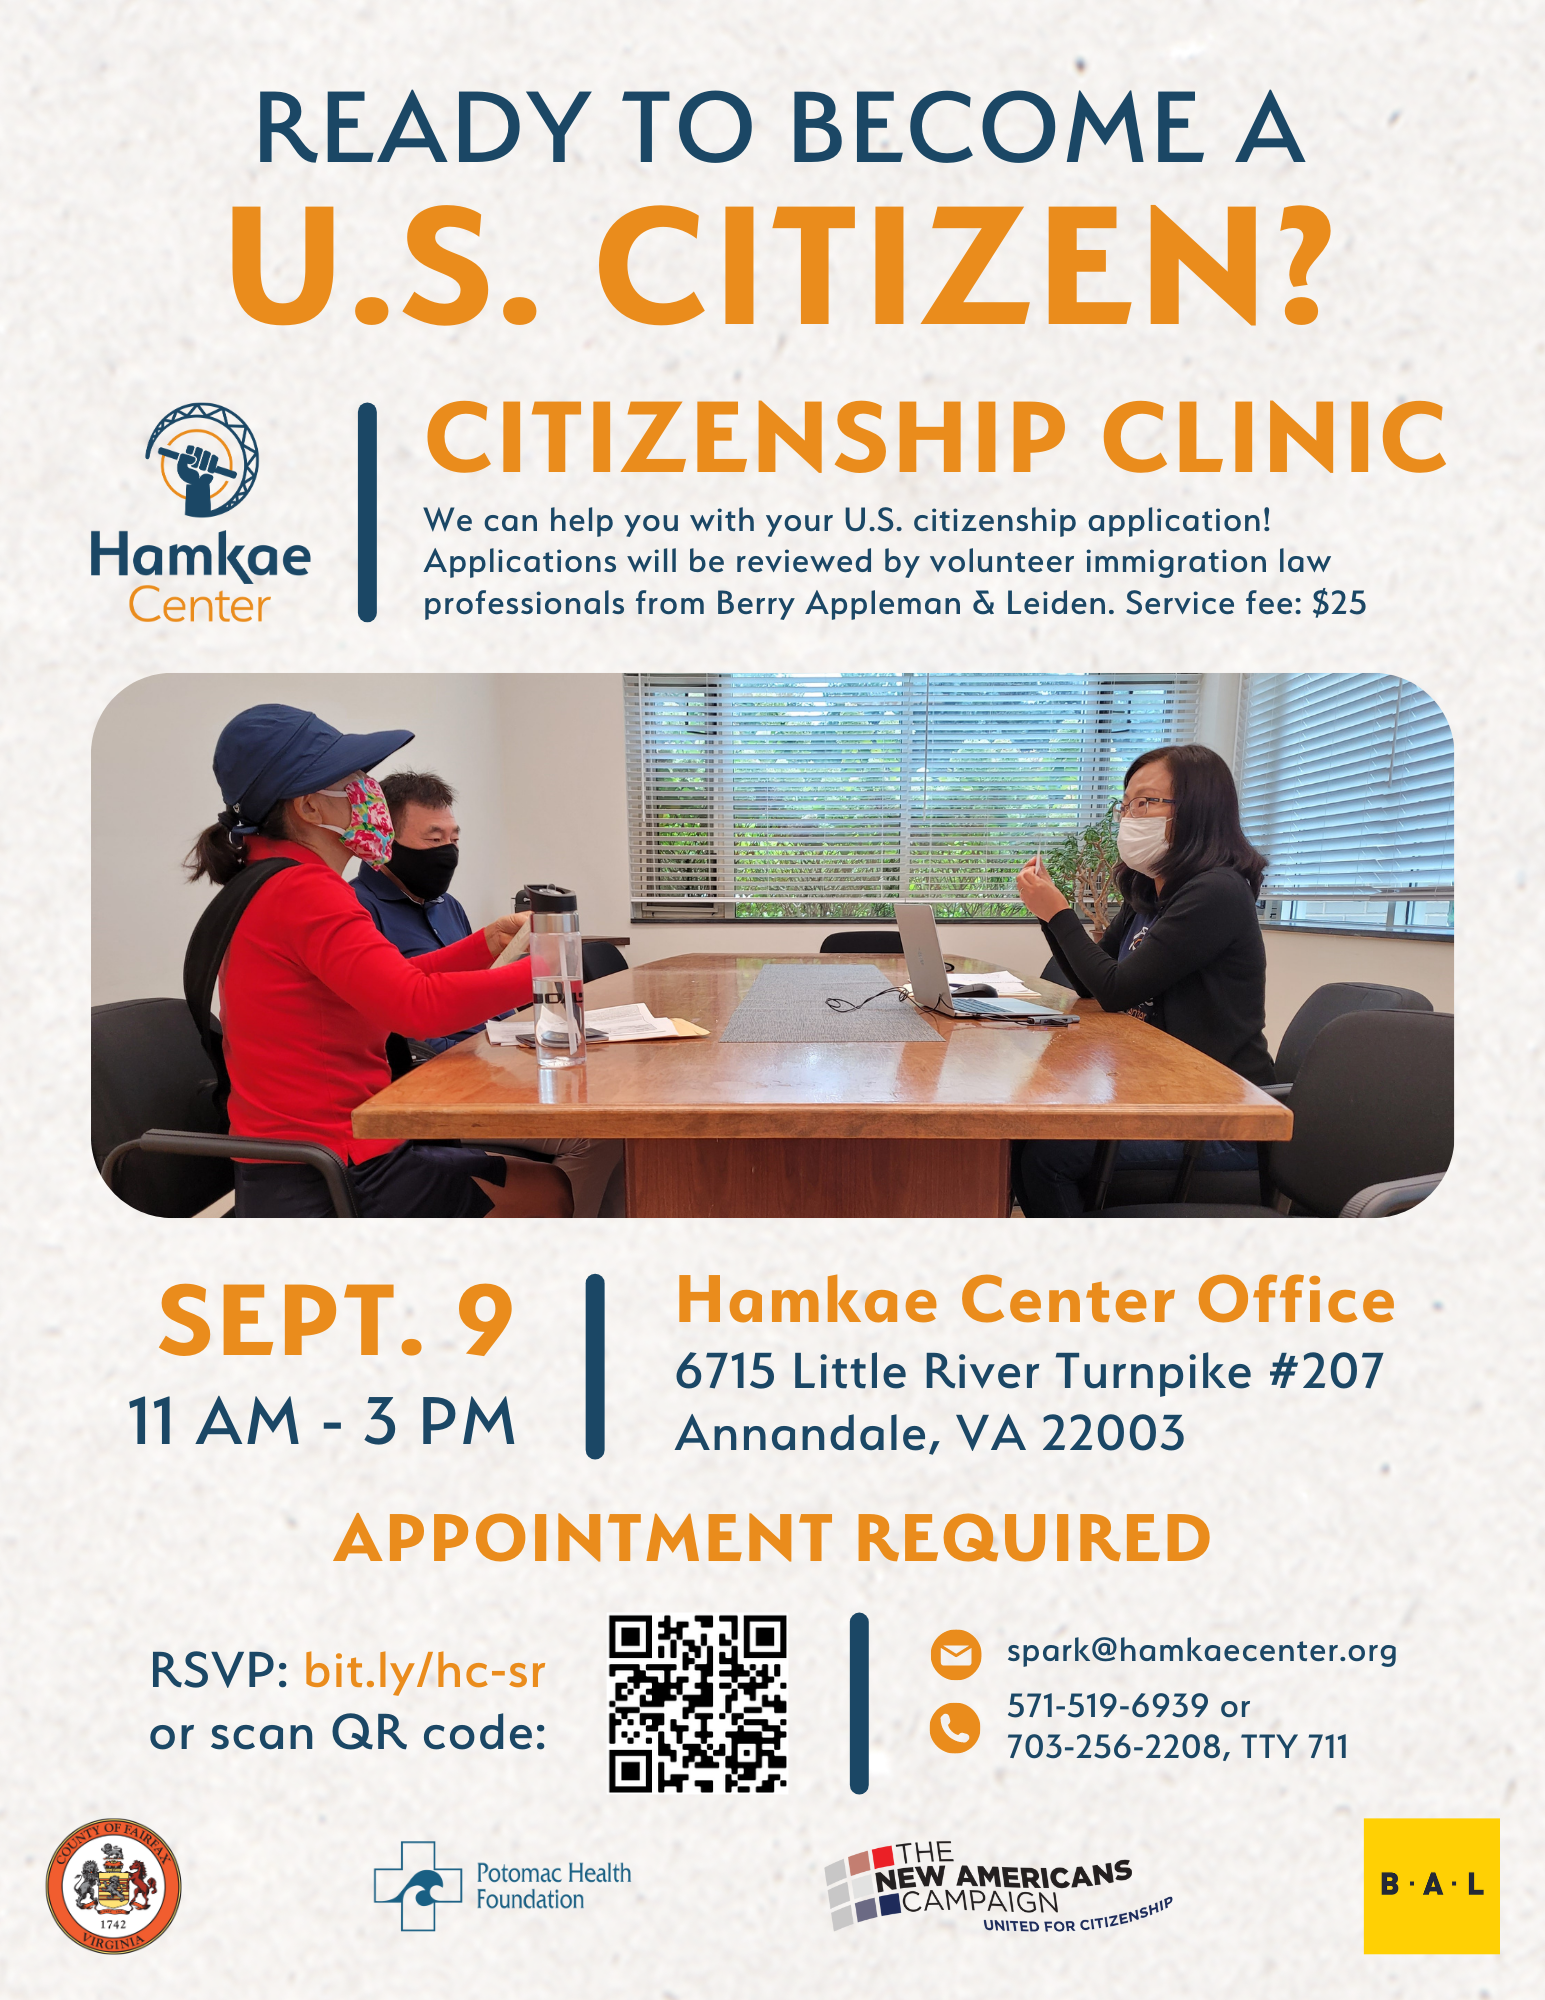 Ready to become a U.S. citizen? Hamkae Center's Citizenship Clinic We can help you with your U.S. citizenship application! Applications will be reviewed by volunteer immigration law professionals from Berry Appleman & Leiden. Service fee: $25 Photo of Hamkae Center staff speaking with 2 Korean community members at a table, with papers and a laptop in front of them. Sept. 9; 11 am - 3 pm Hamkae Center Office (6715 Little River Turnpike #207, Annandale, VA 22003) Appointment required: RSVP: bit.ly/hc-sr or scan QR code. spark@hamkaecenter.org 571-519-6939 or 703-256-2208, TTY 711 Logos of Fairfax County, Potomac Health Foundation, The New Americans Campaign, and Berry Appleman & Leiden.